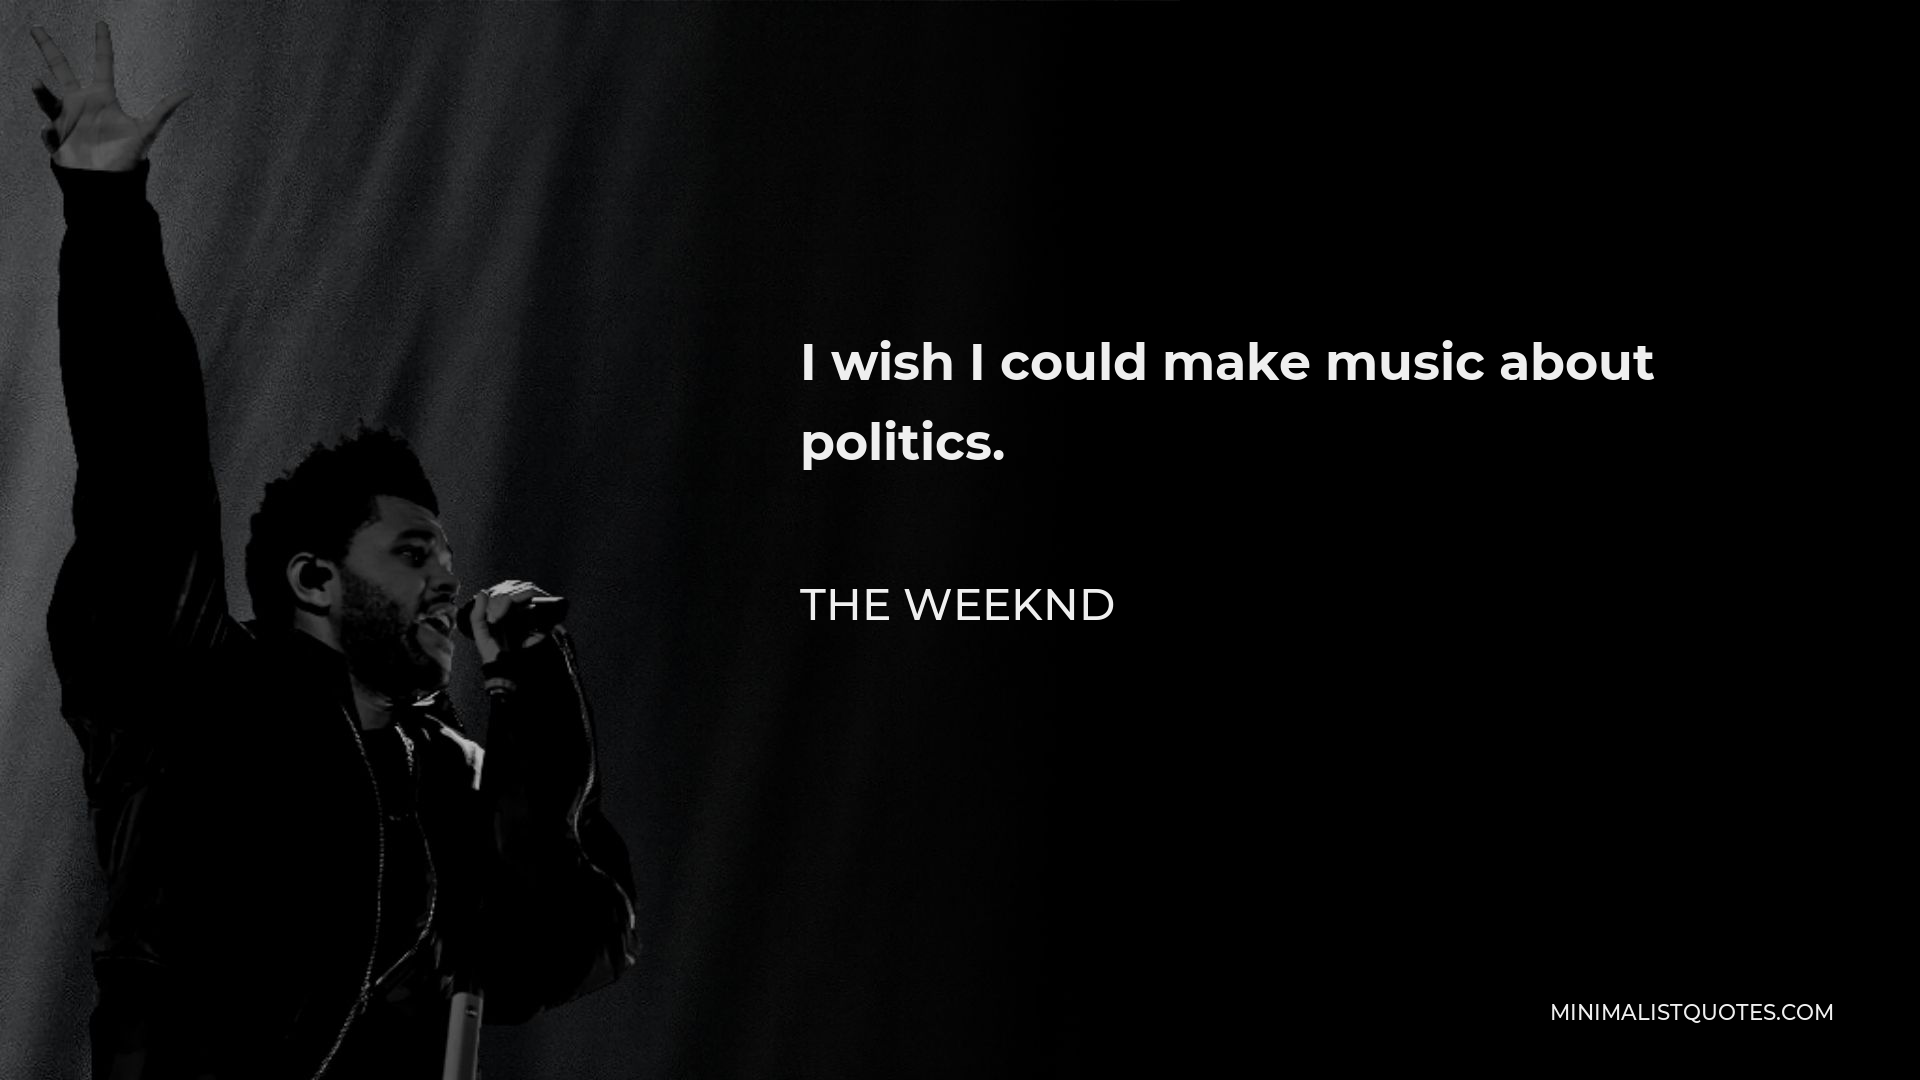 The Weeknd Quote - I wish I could make music about politics.